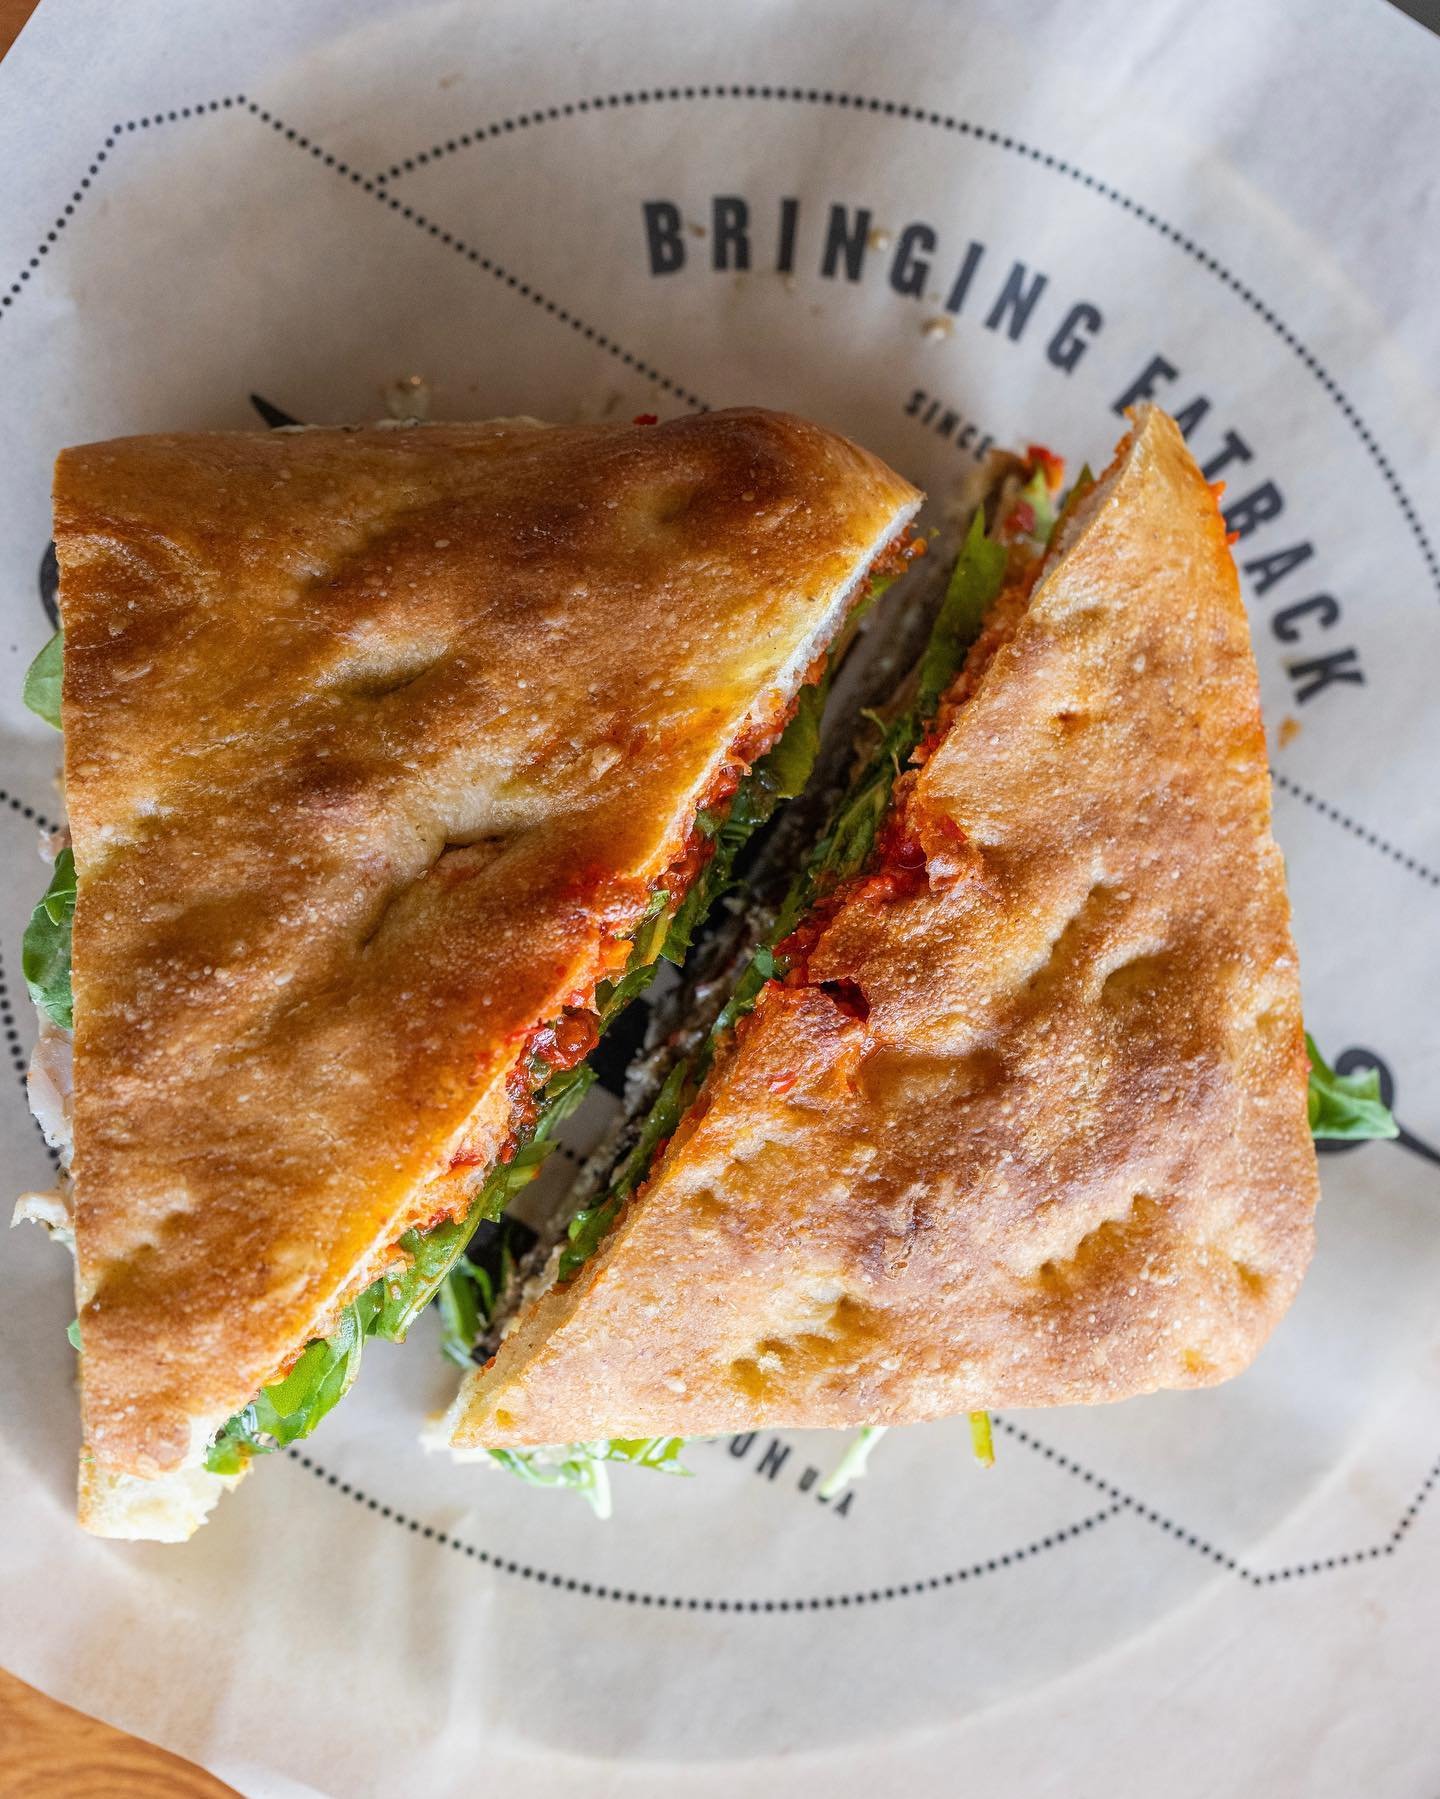 Let call for this delicious beauty, by chef Kyle Anderson @butcherpdx. 

And remember you can get it as a salad, on fries, or on both (last slide)!

The Bridesmaid
Kyle&rsquo;s focaccia, sliced porchetta, grilled, marinated eggplant, Calabrian chili,